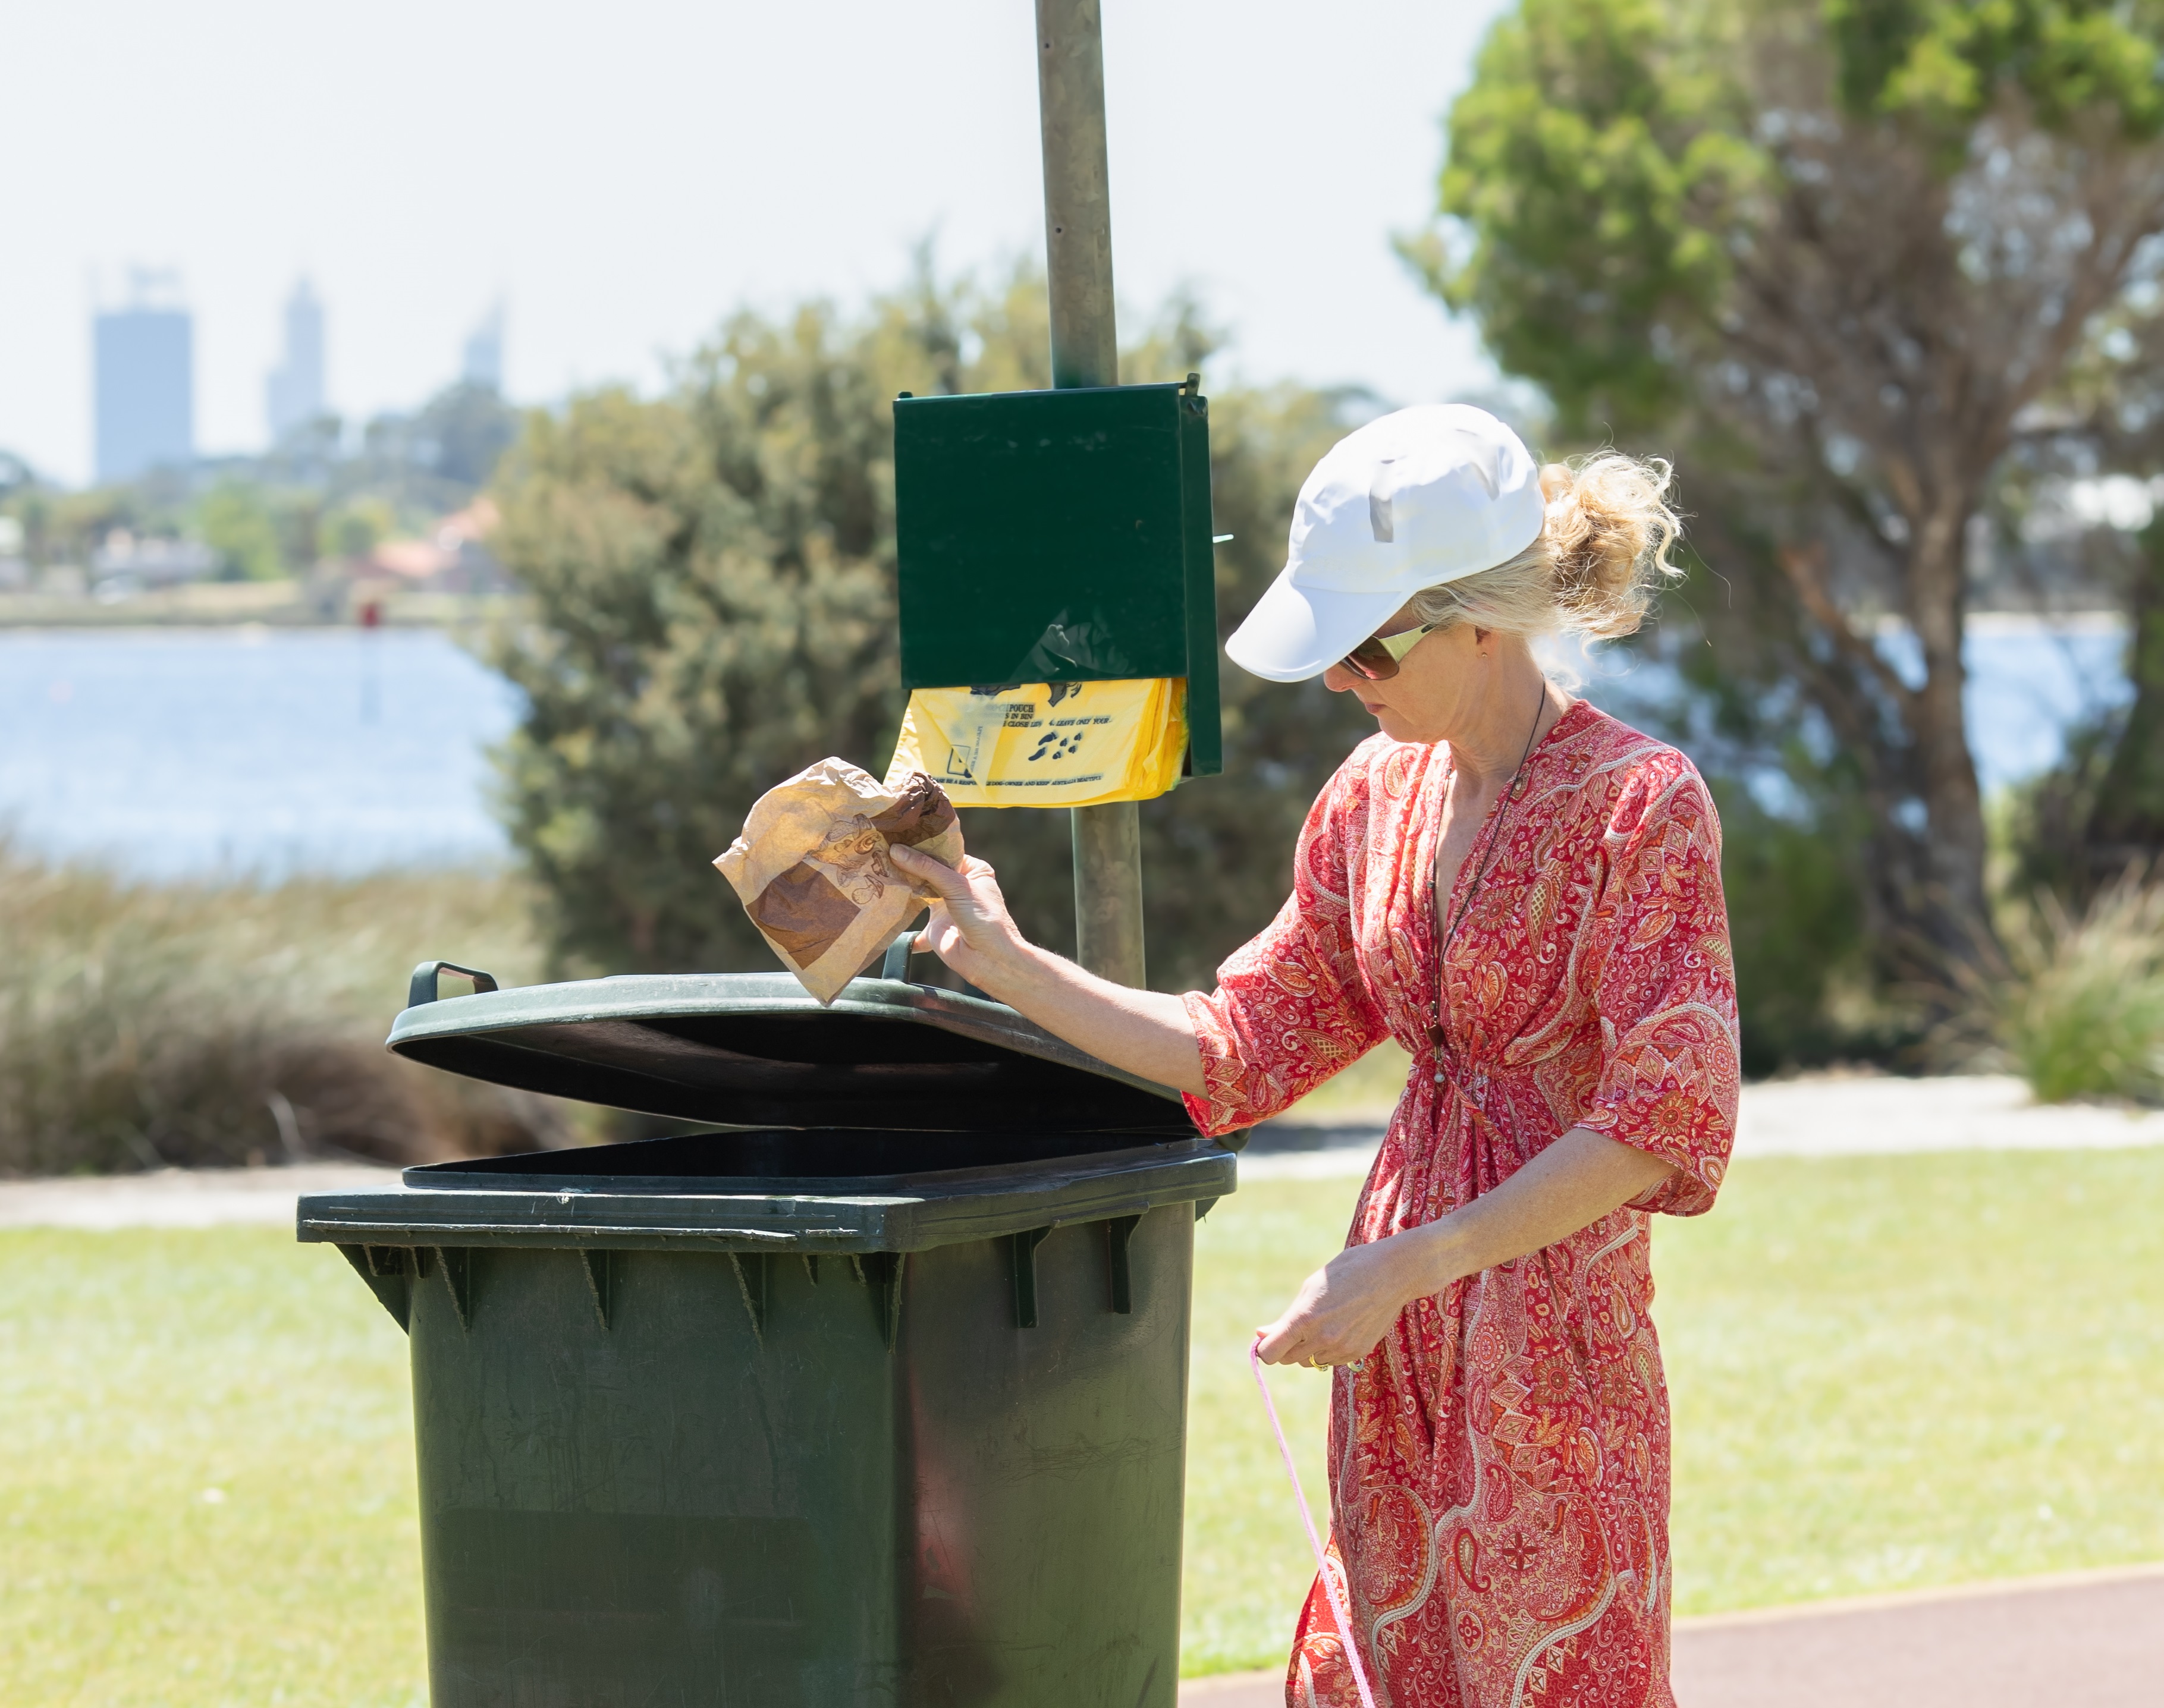 Woman putting rubbish in bin at a dog park.